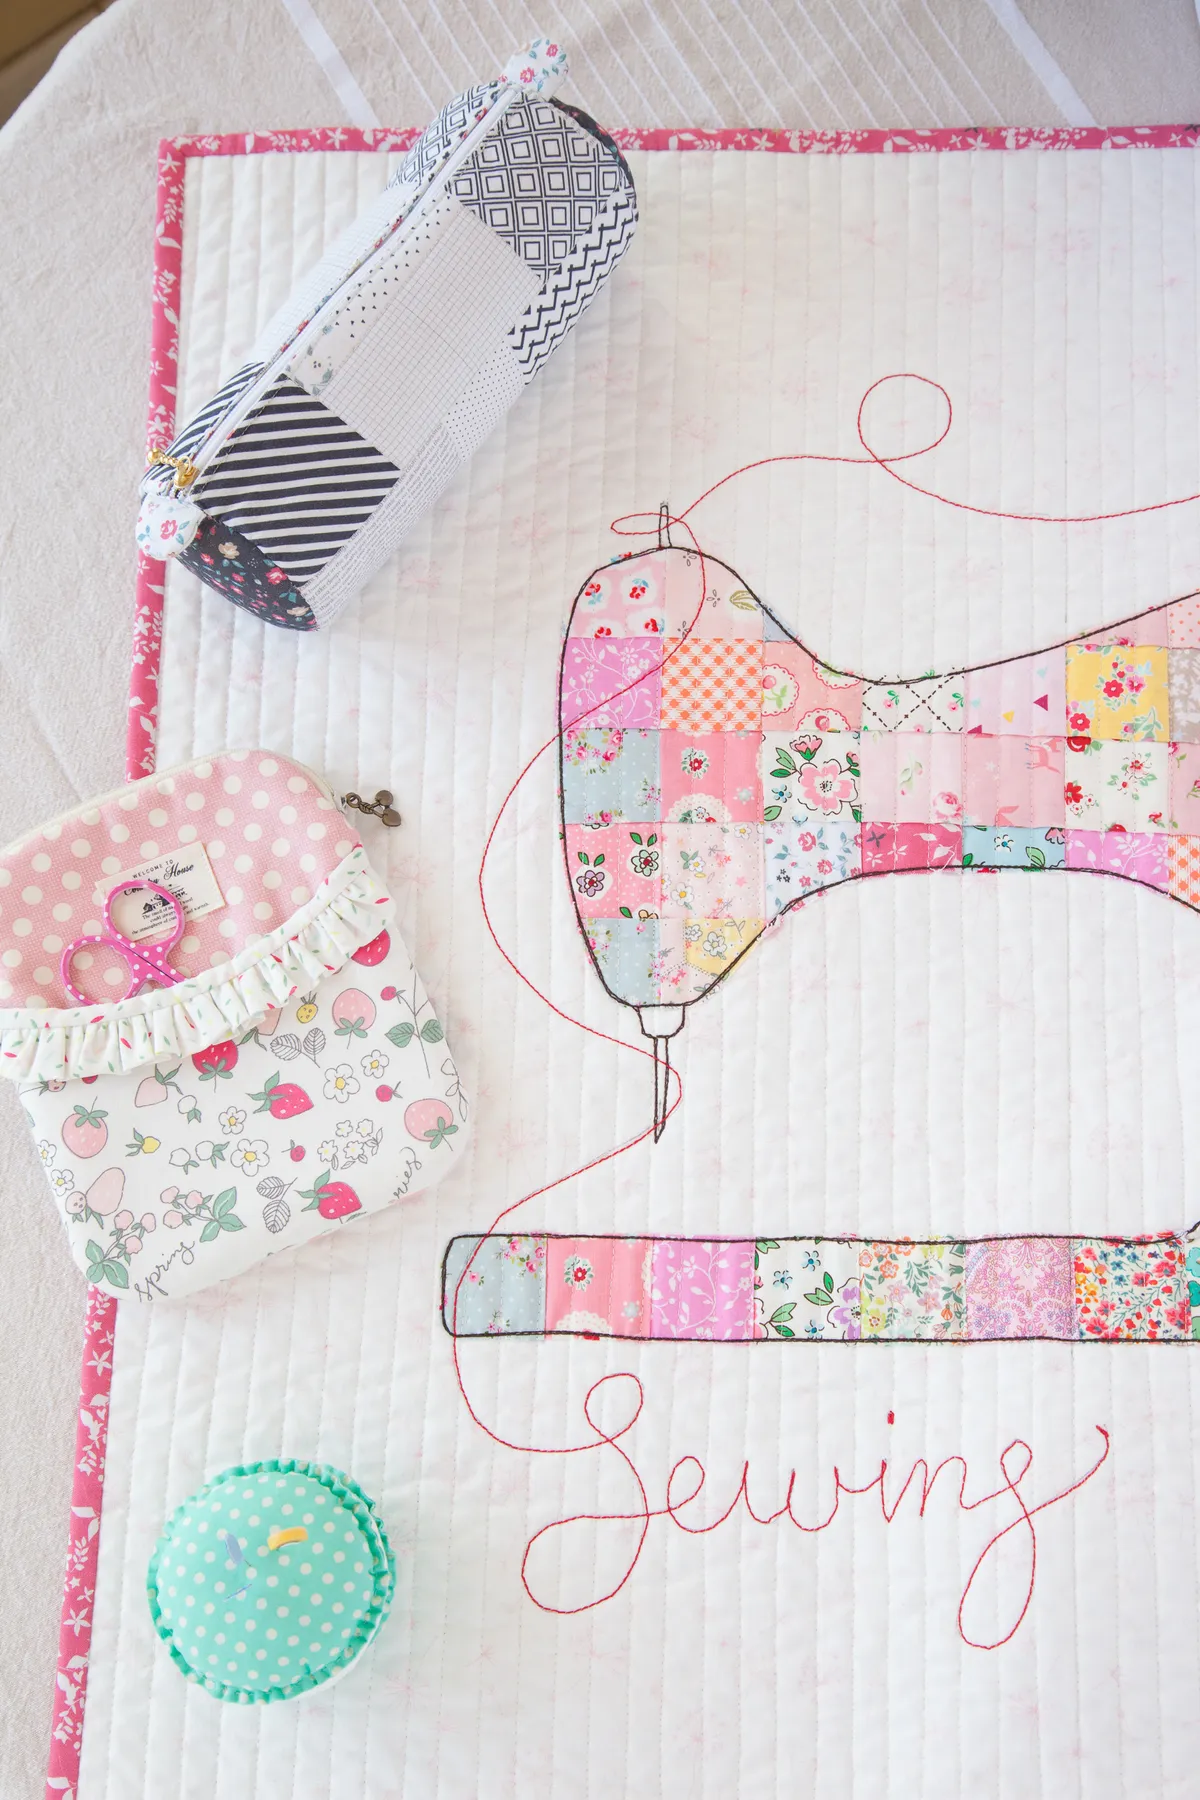 Embroidered sewing machine pattern